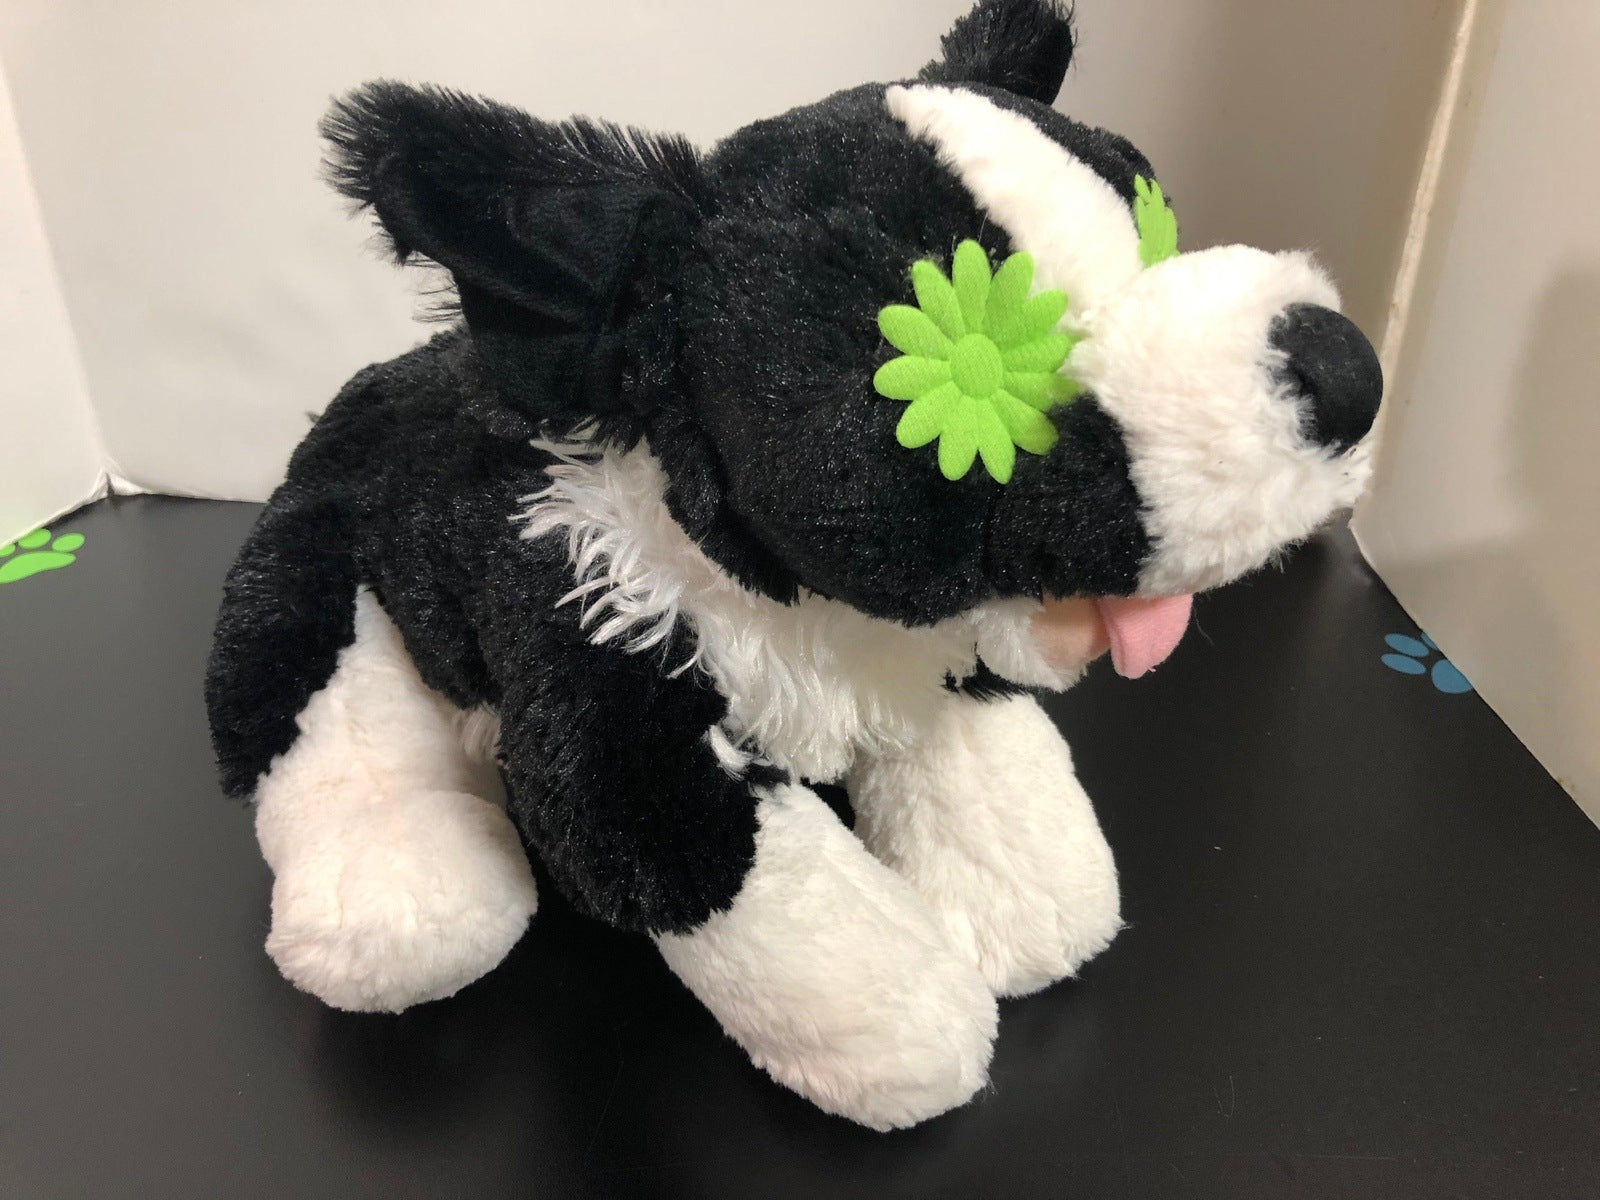 Mini Me Squeaky Breed Dog Toy: Black & White Mutts